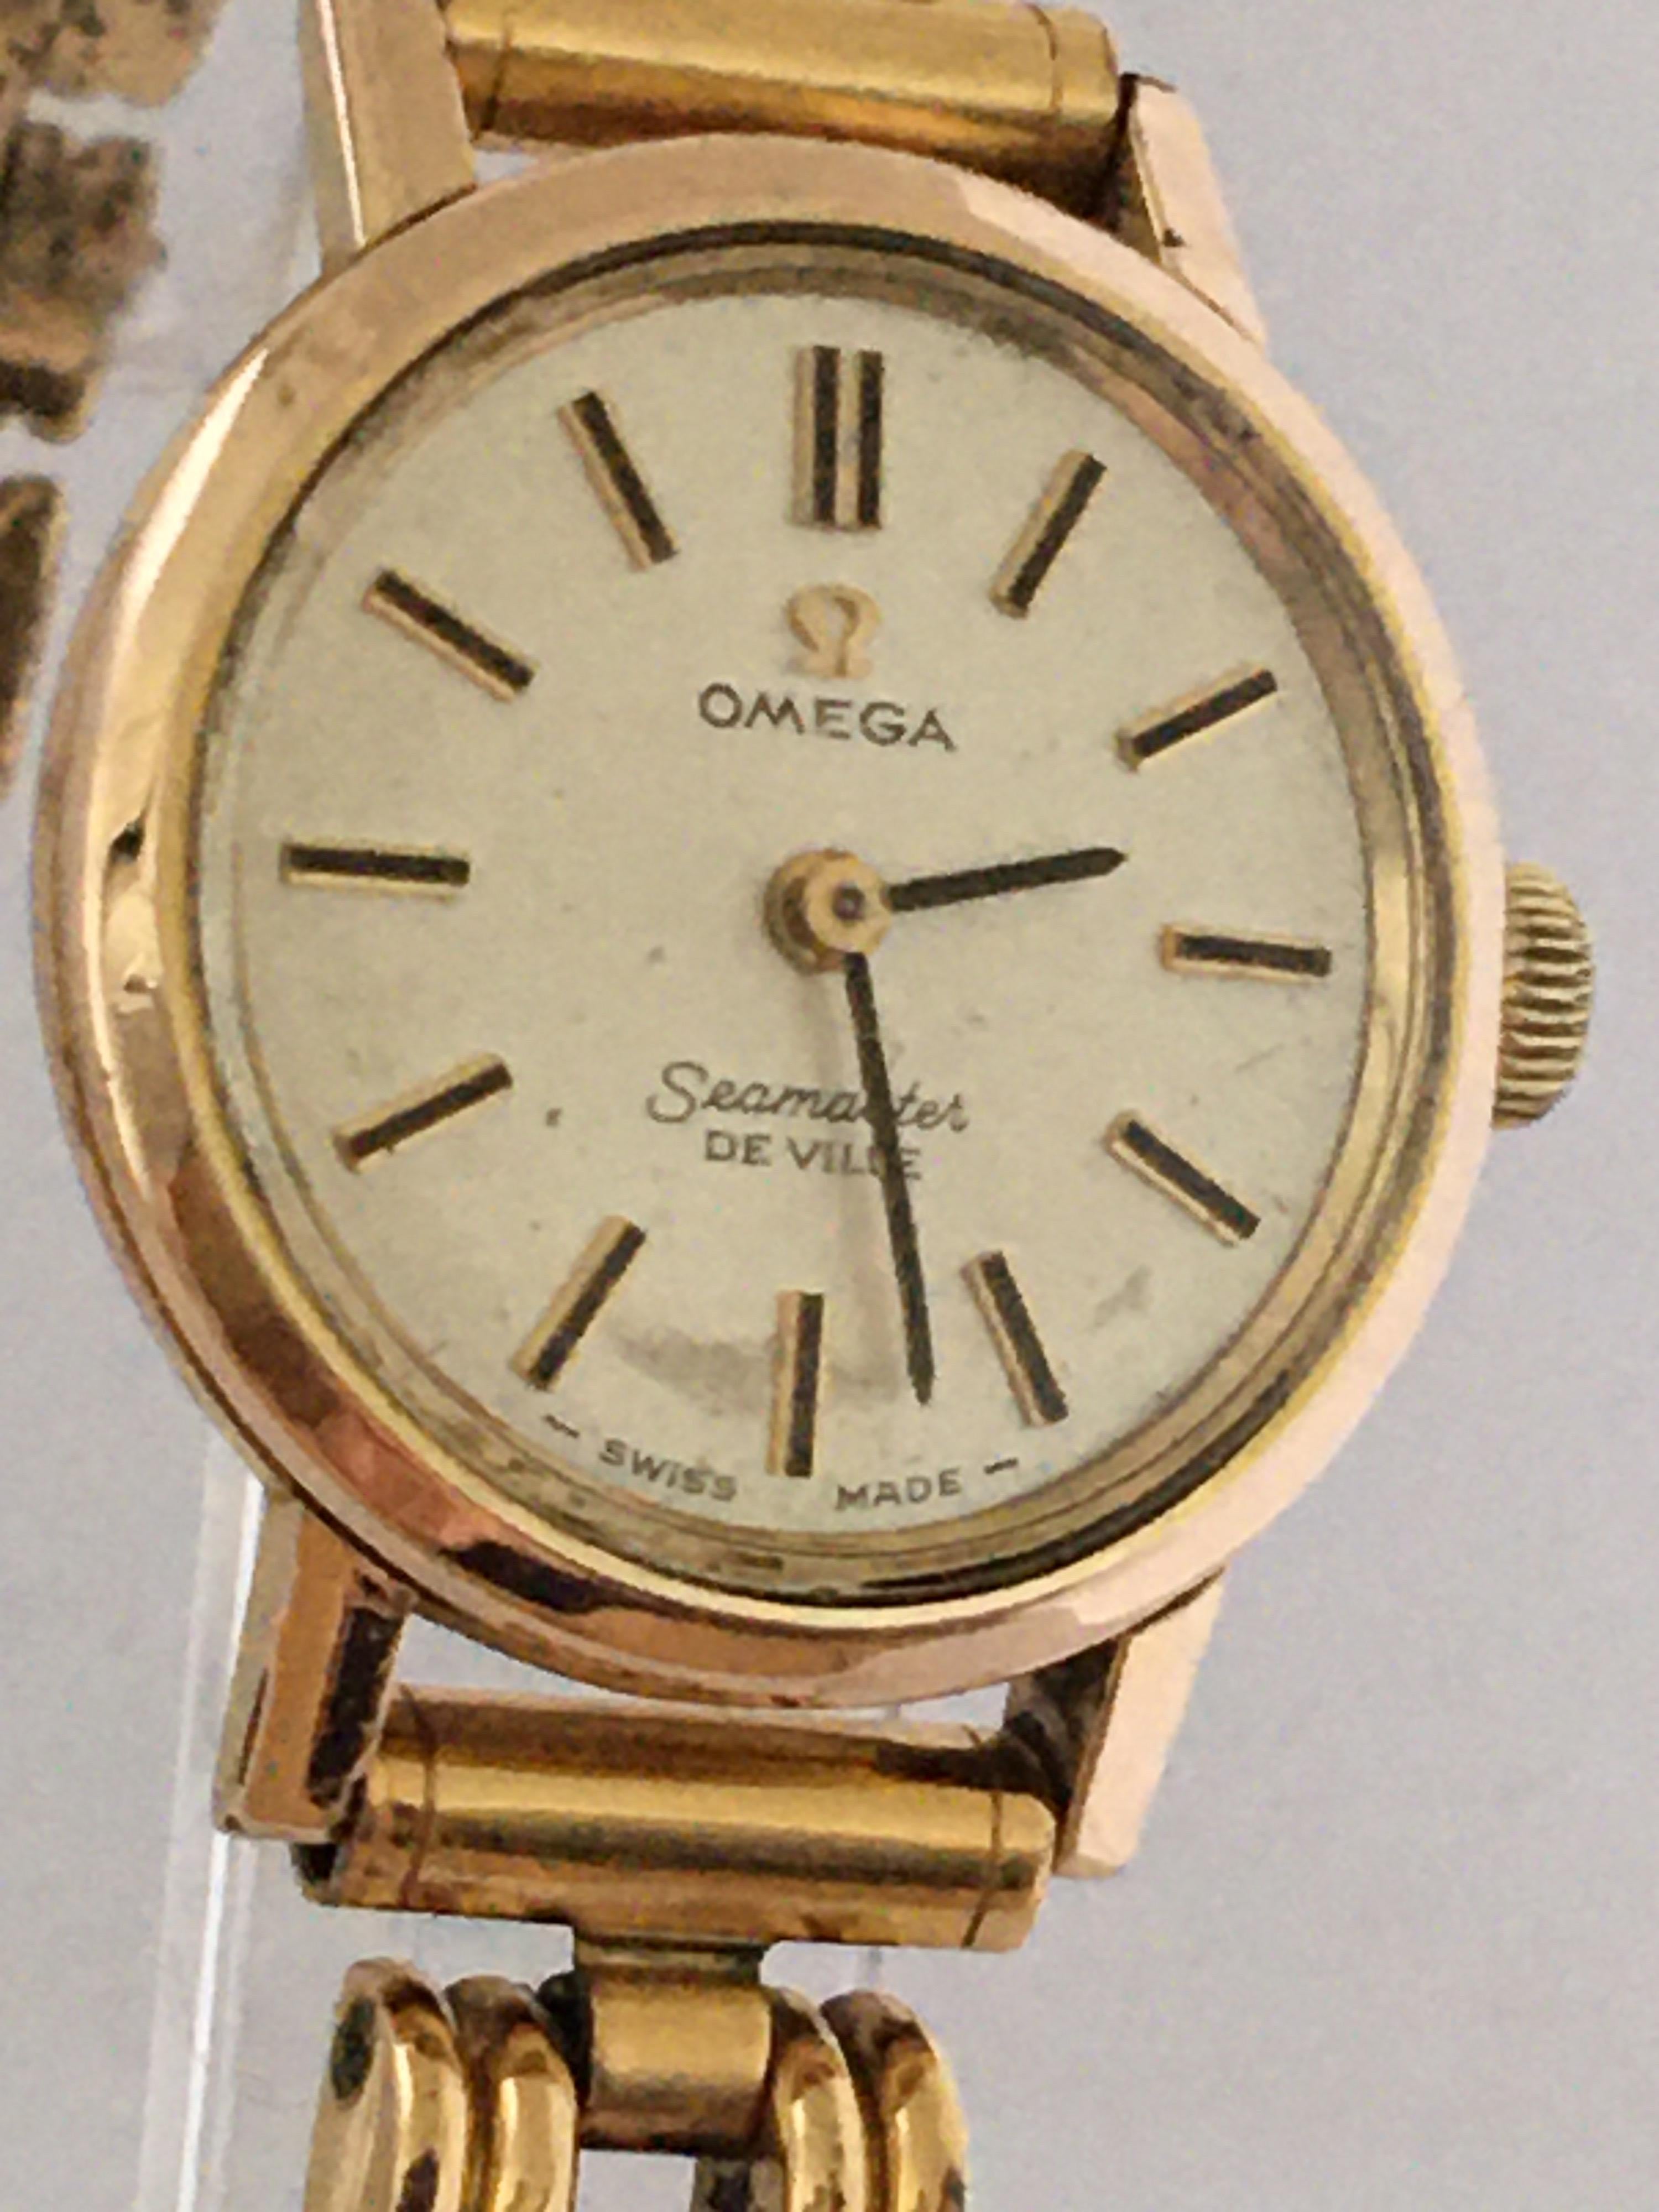 This beautiful 1970's gold little watch is working and it is ticking well. The gold plated winder & strap is a bit tarnished as shown. 

Please study the images carefully as form part of the description.